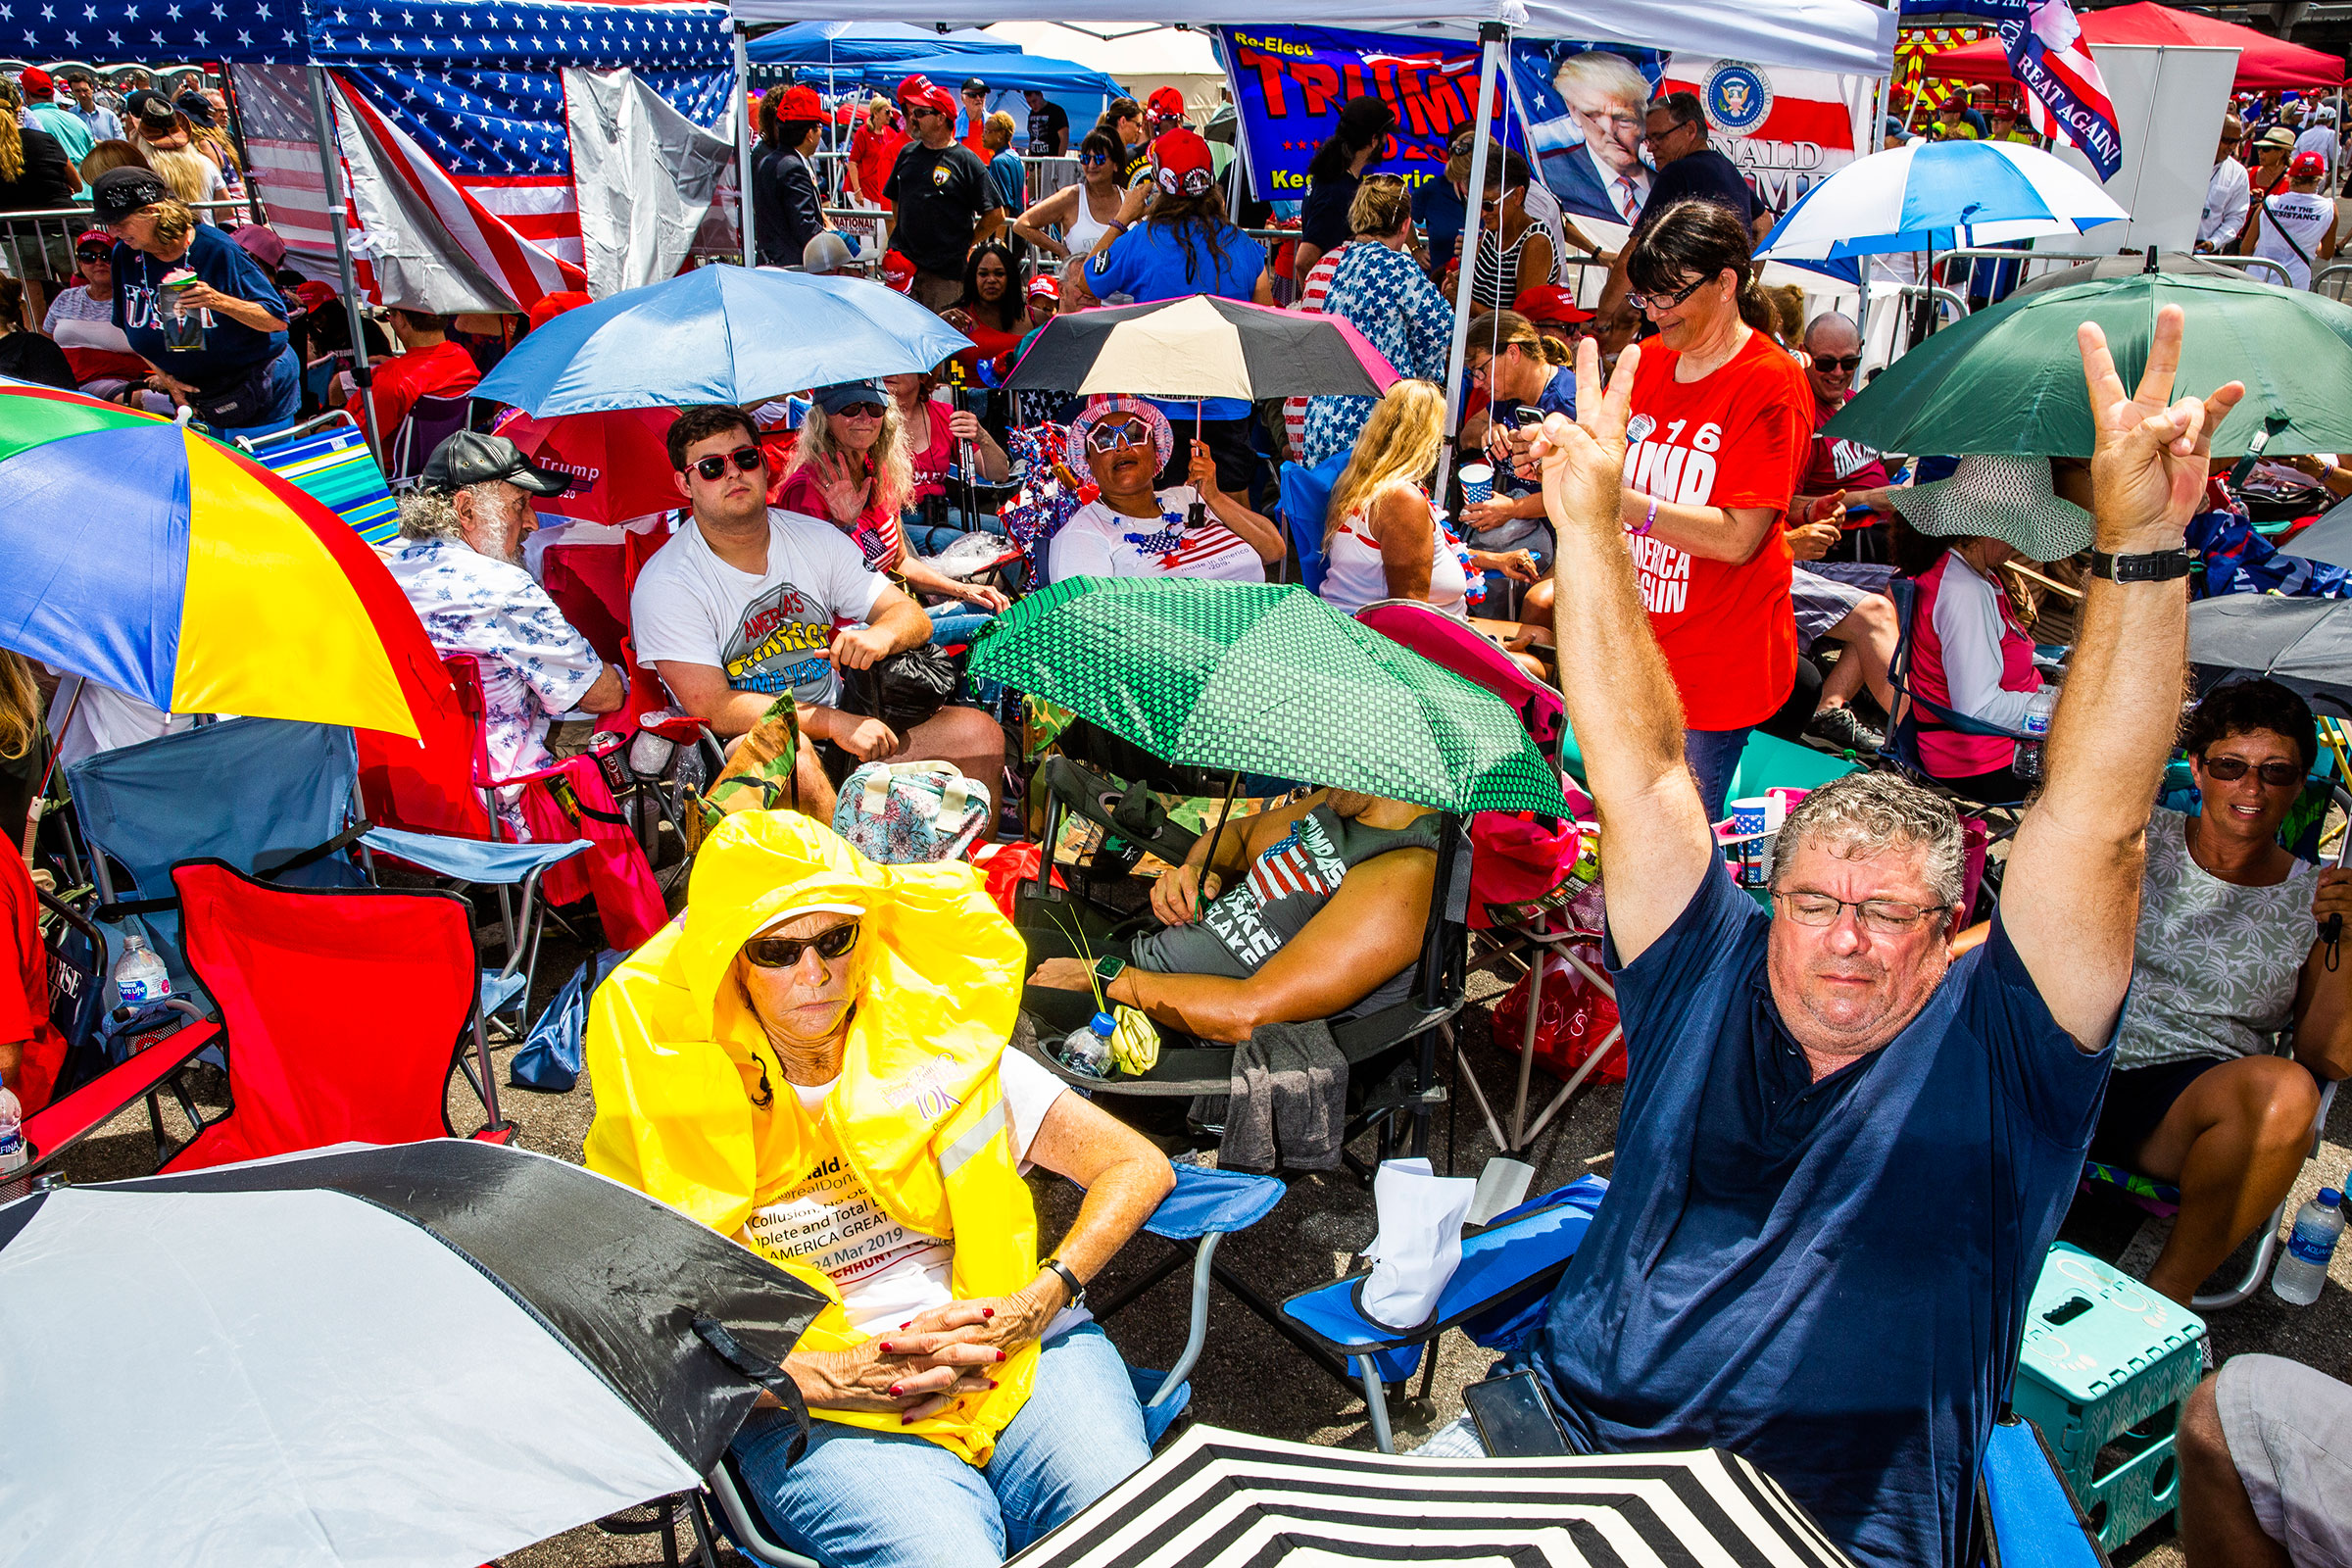 Supporters attend a Trump rally held to announce his candidacy for a second presidential term, in Orlando. (David Williams—Redux for TIME)